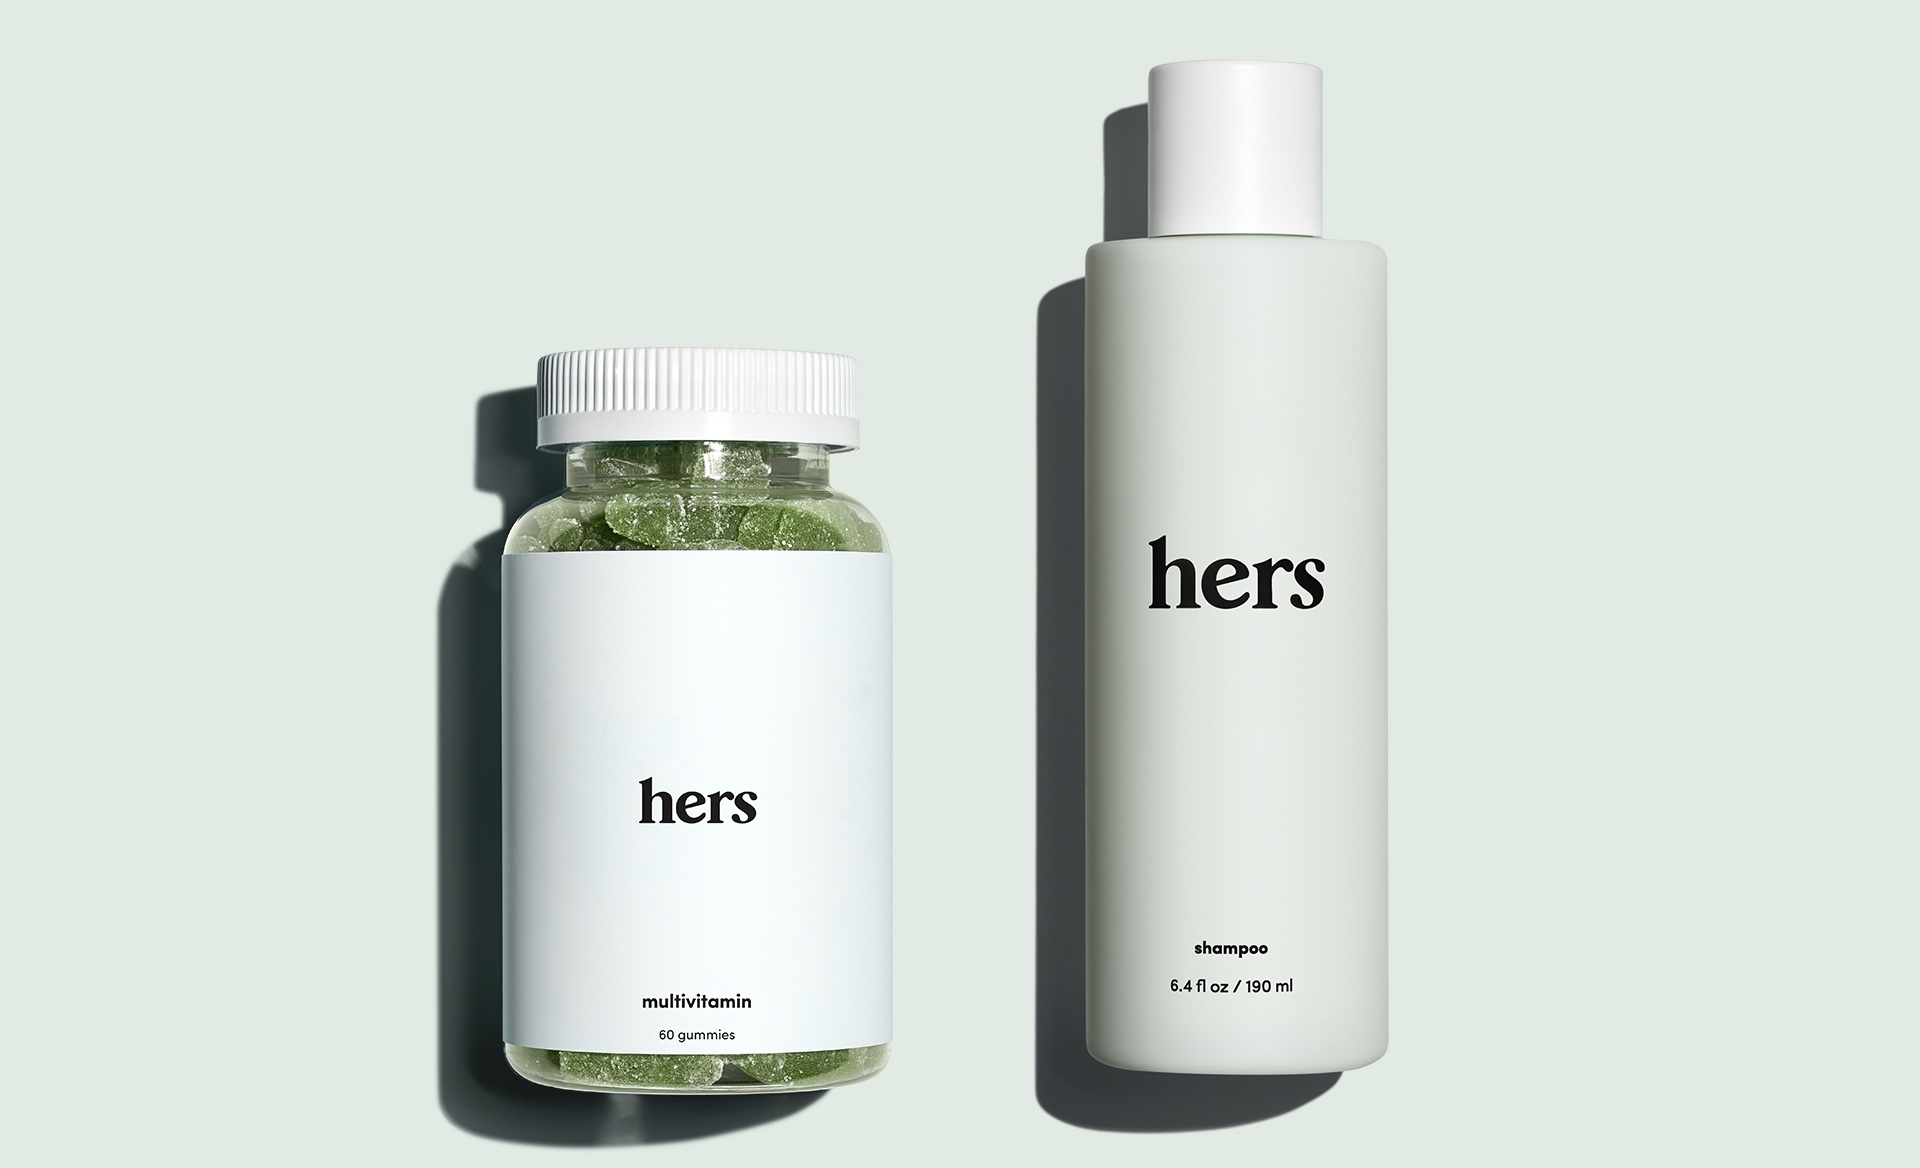 Men's wellness startup Hims has launched a line of women's health products  called Hers